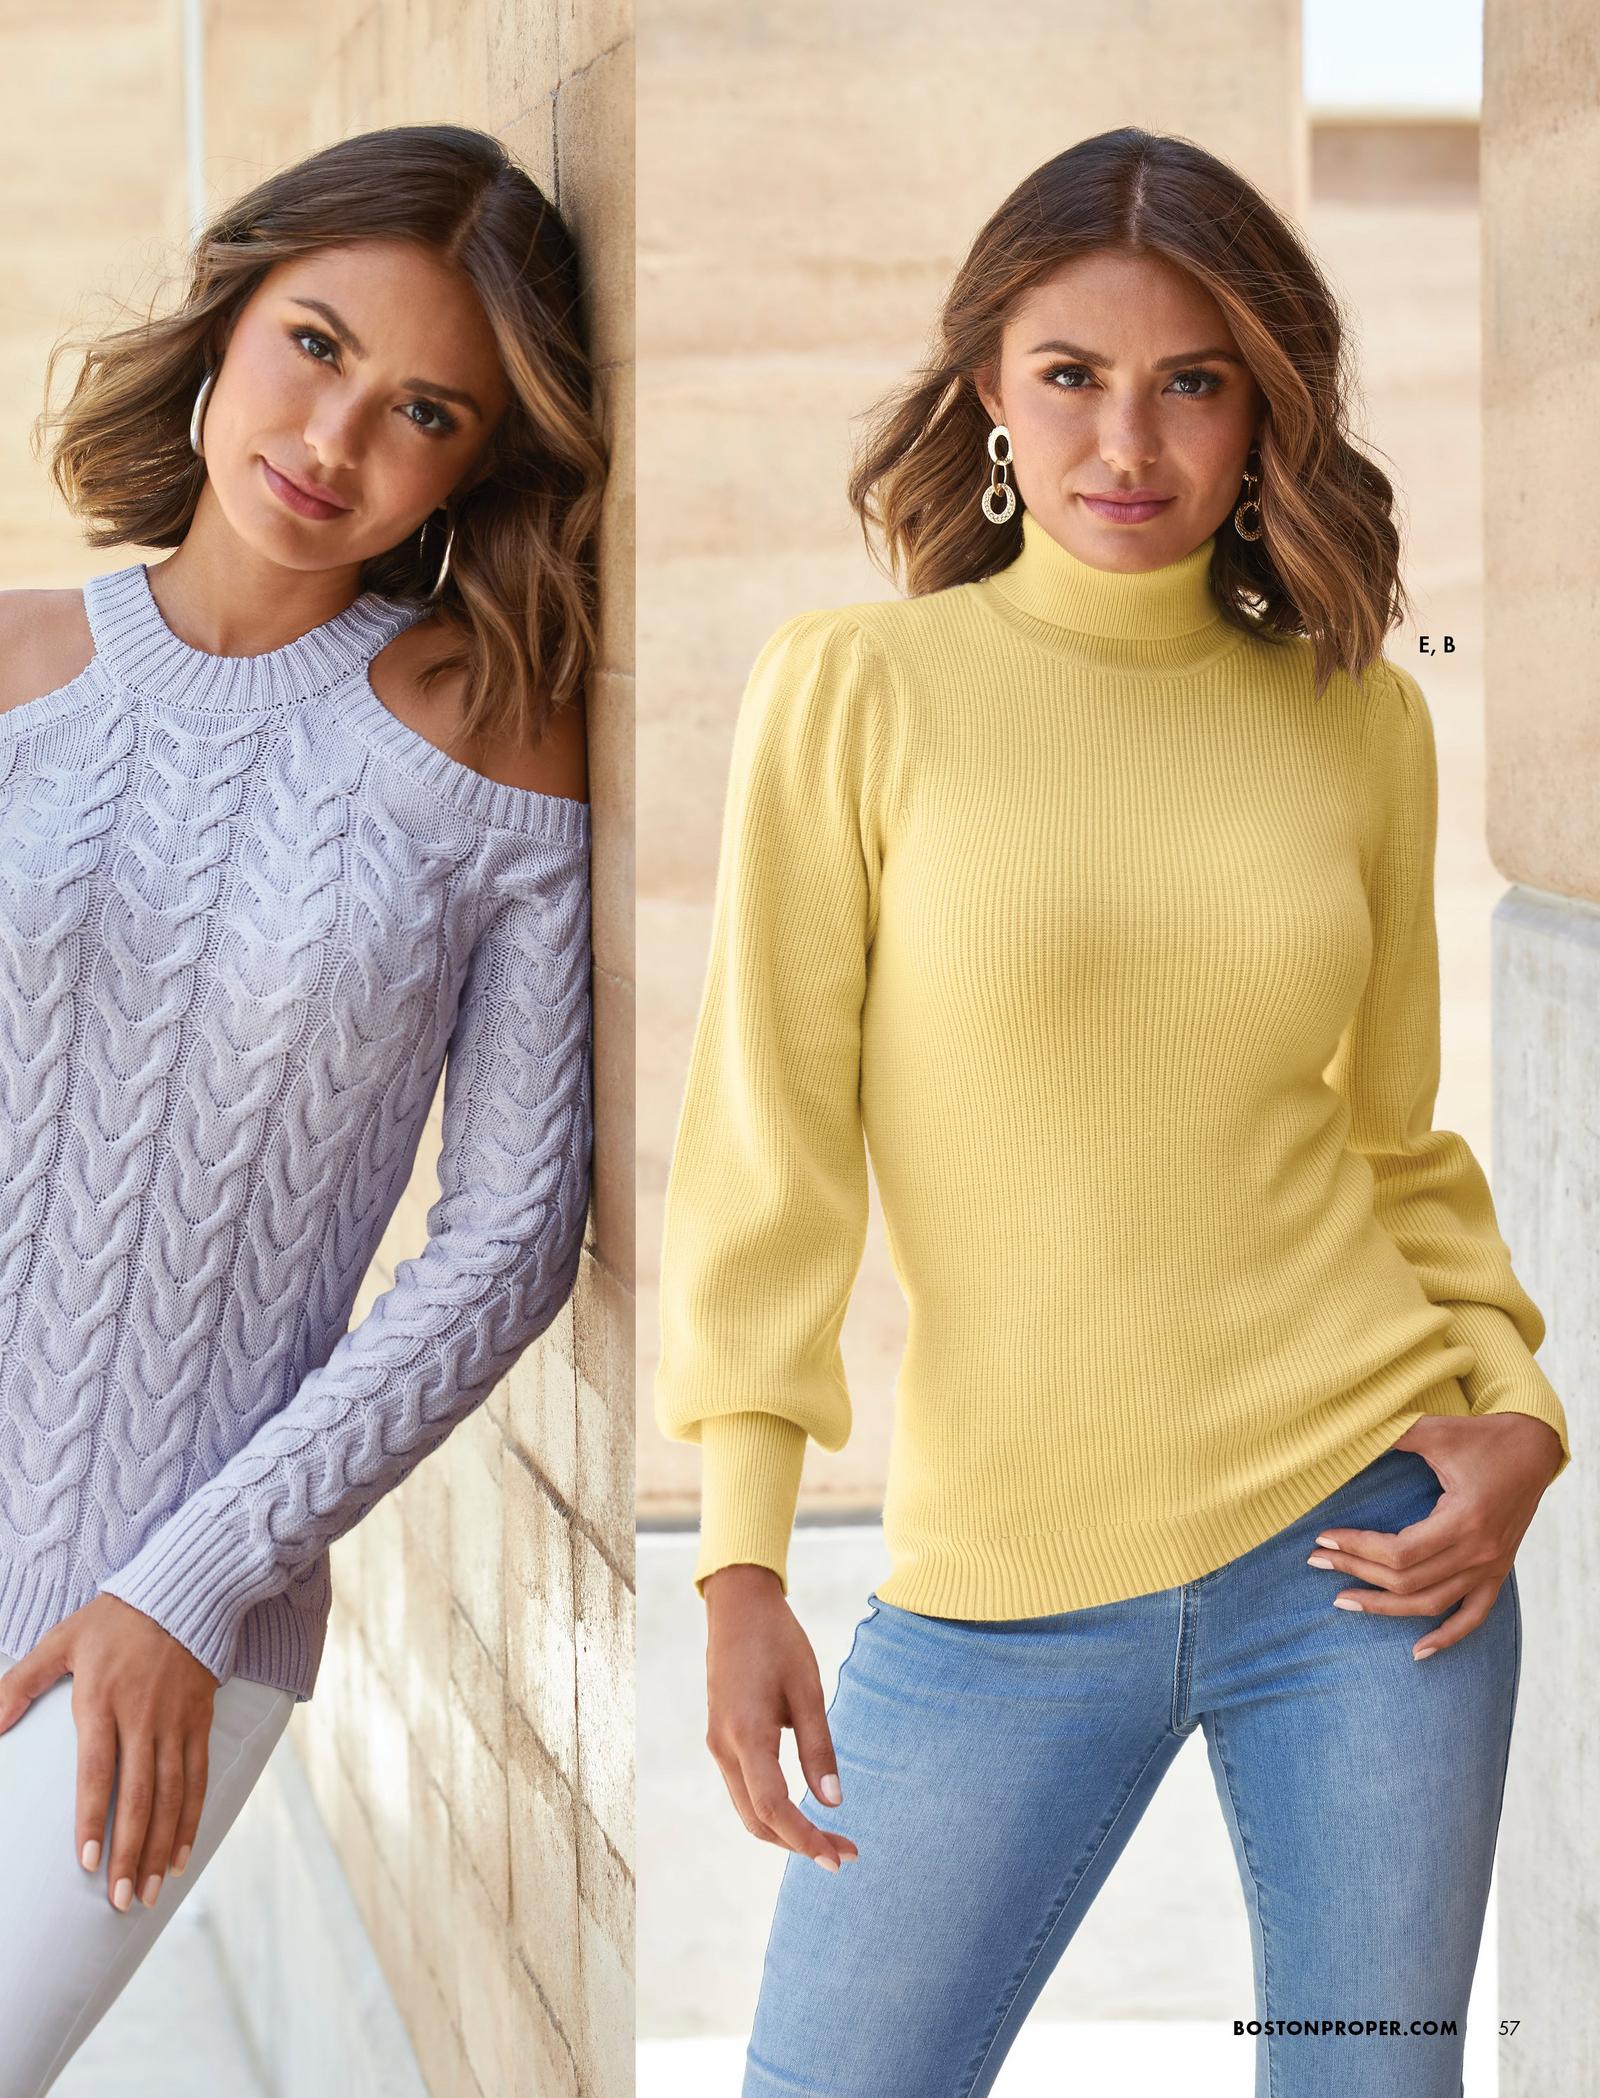 left model wearing a lavender cable knit cold shoulder sweater and white jeans. right model wearing a yellow balloon sleeve turtleneck sweater and light wash jeans.